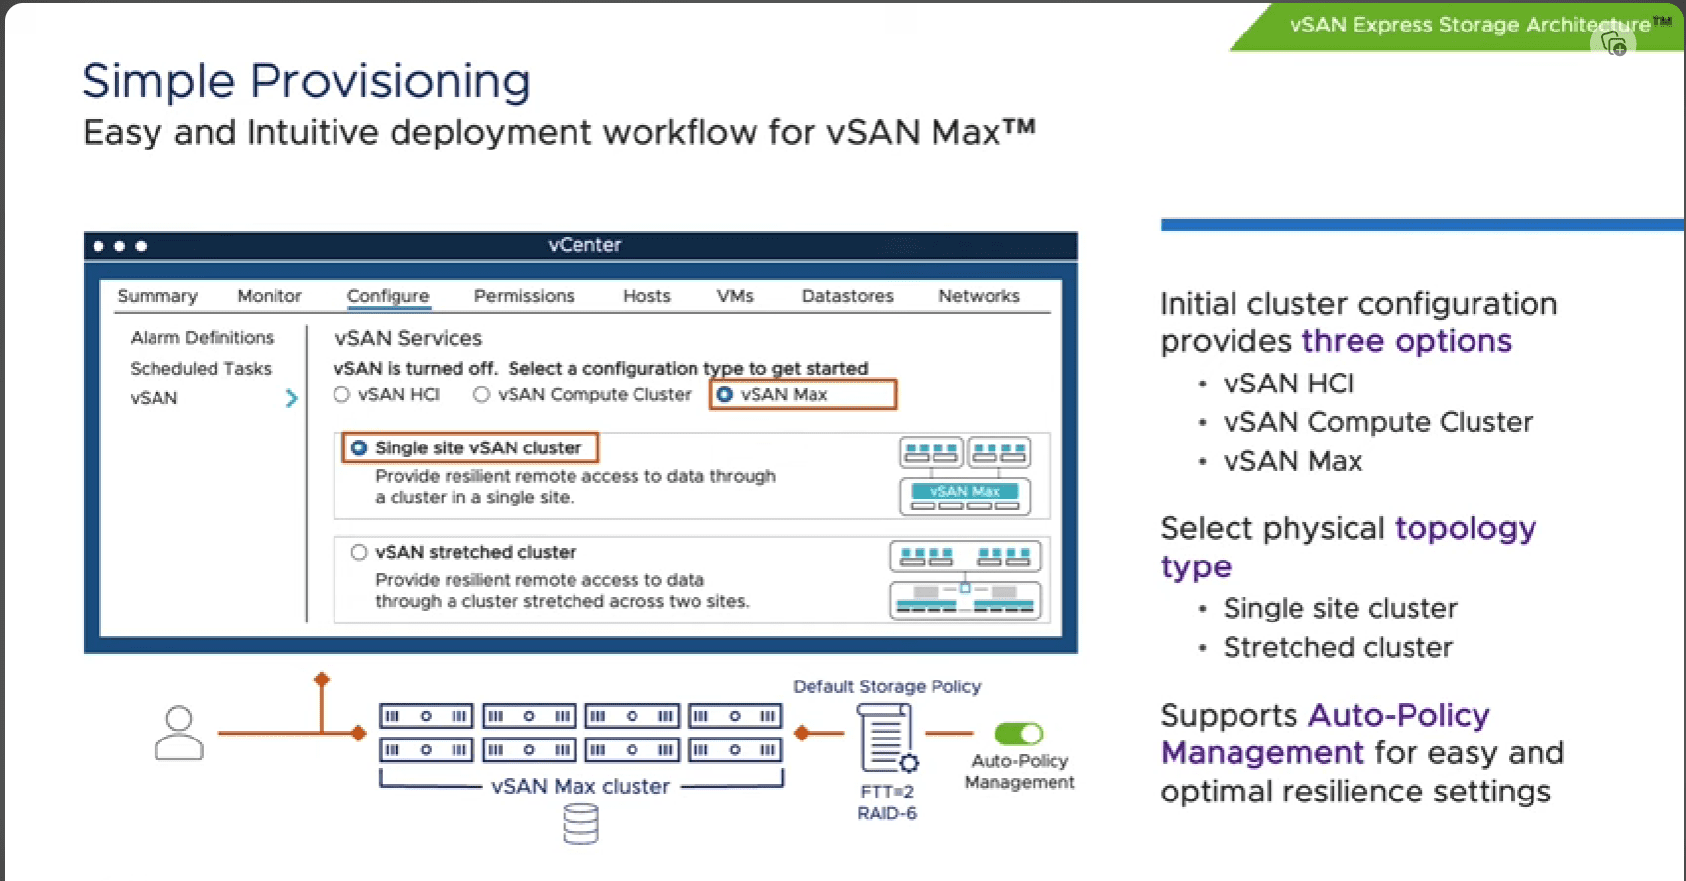 The process to provision vsan max is simple